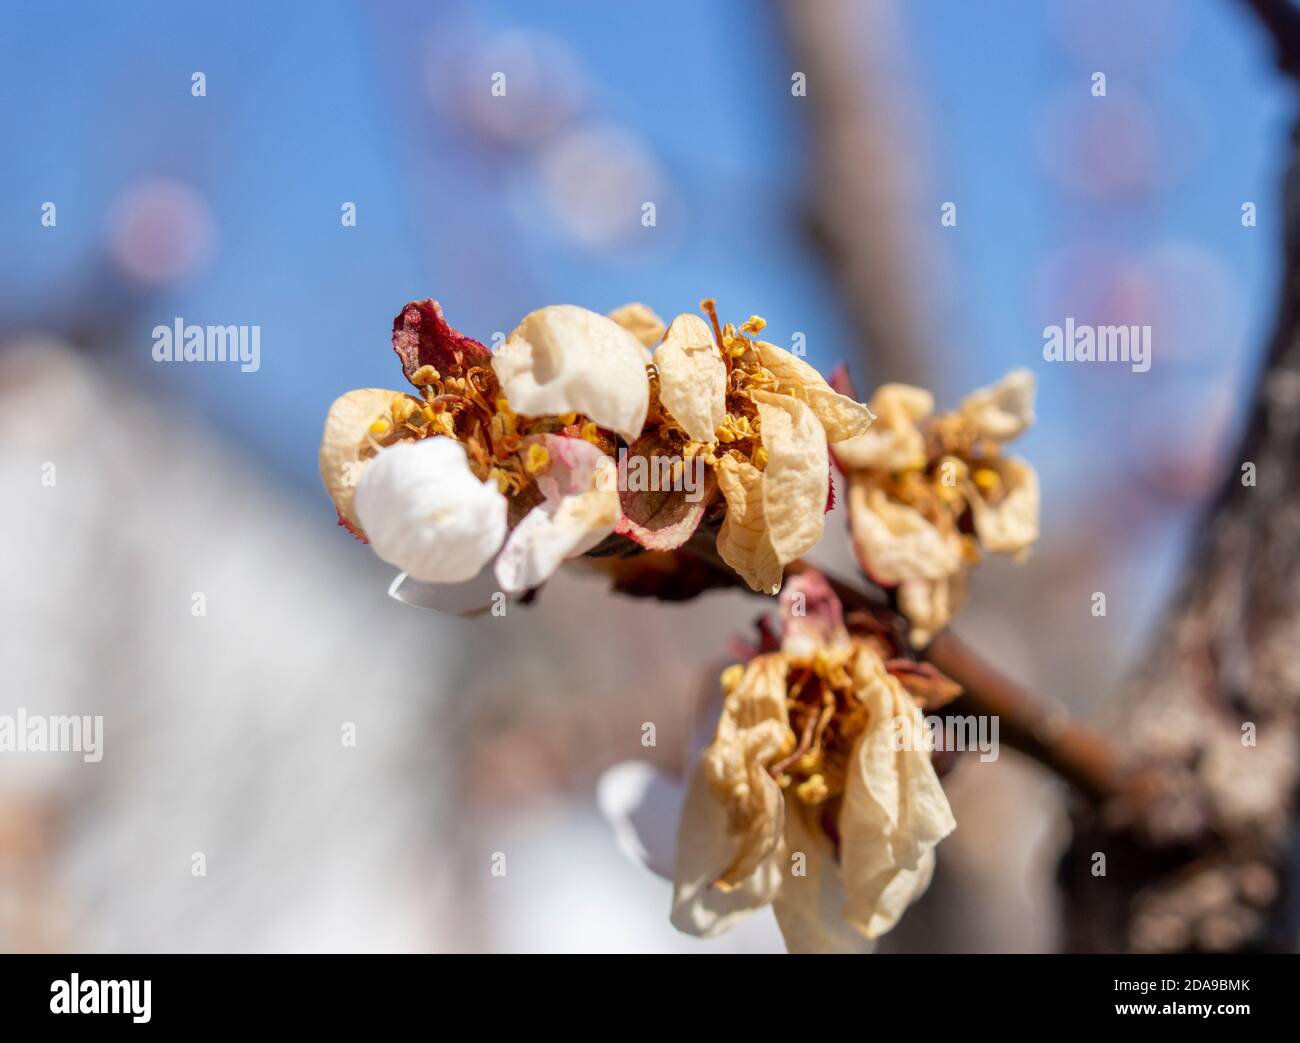 Damaged inflorescence of fruit trees apricot frosts. Decrease in fruit yield due to inclement weather in spring. Stock Photo